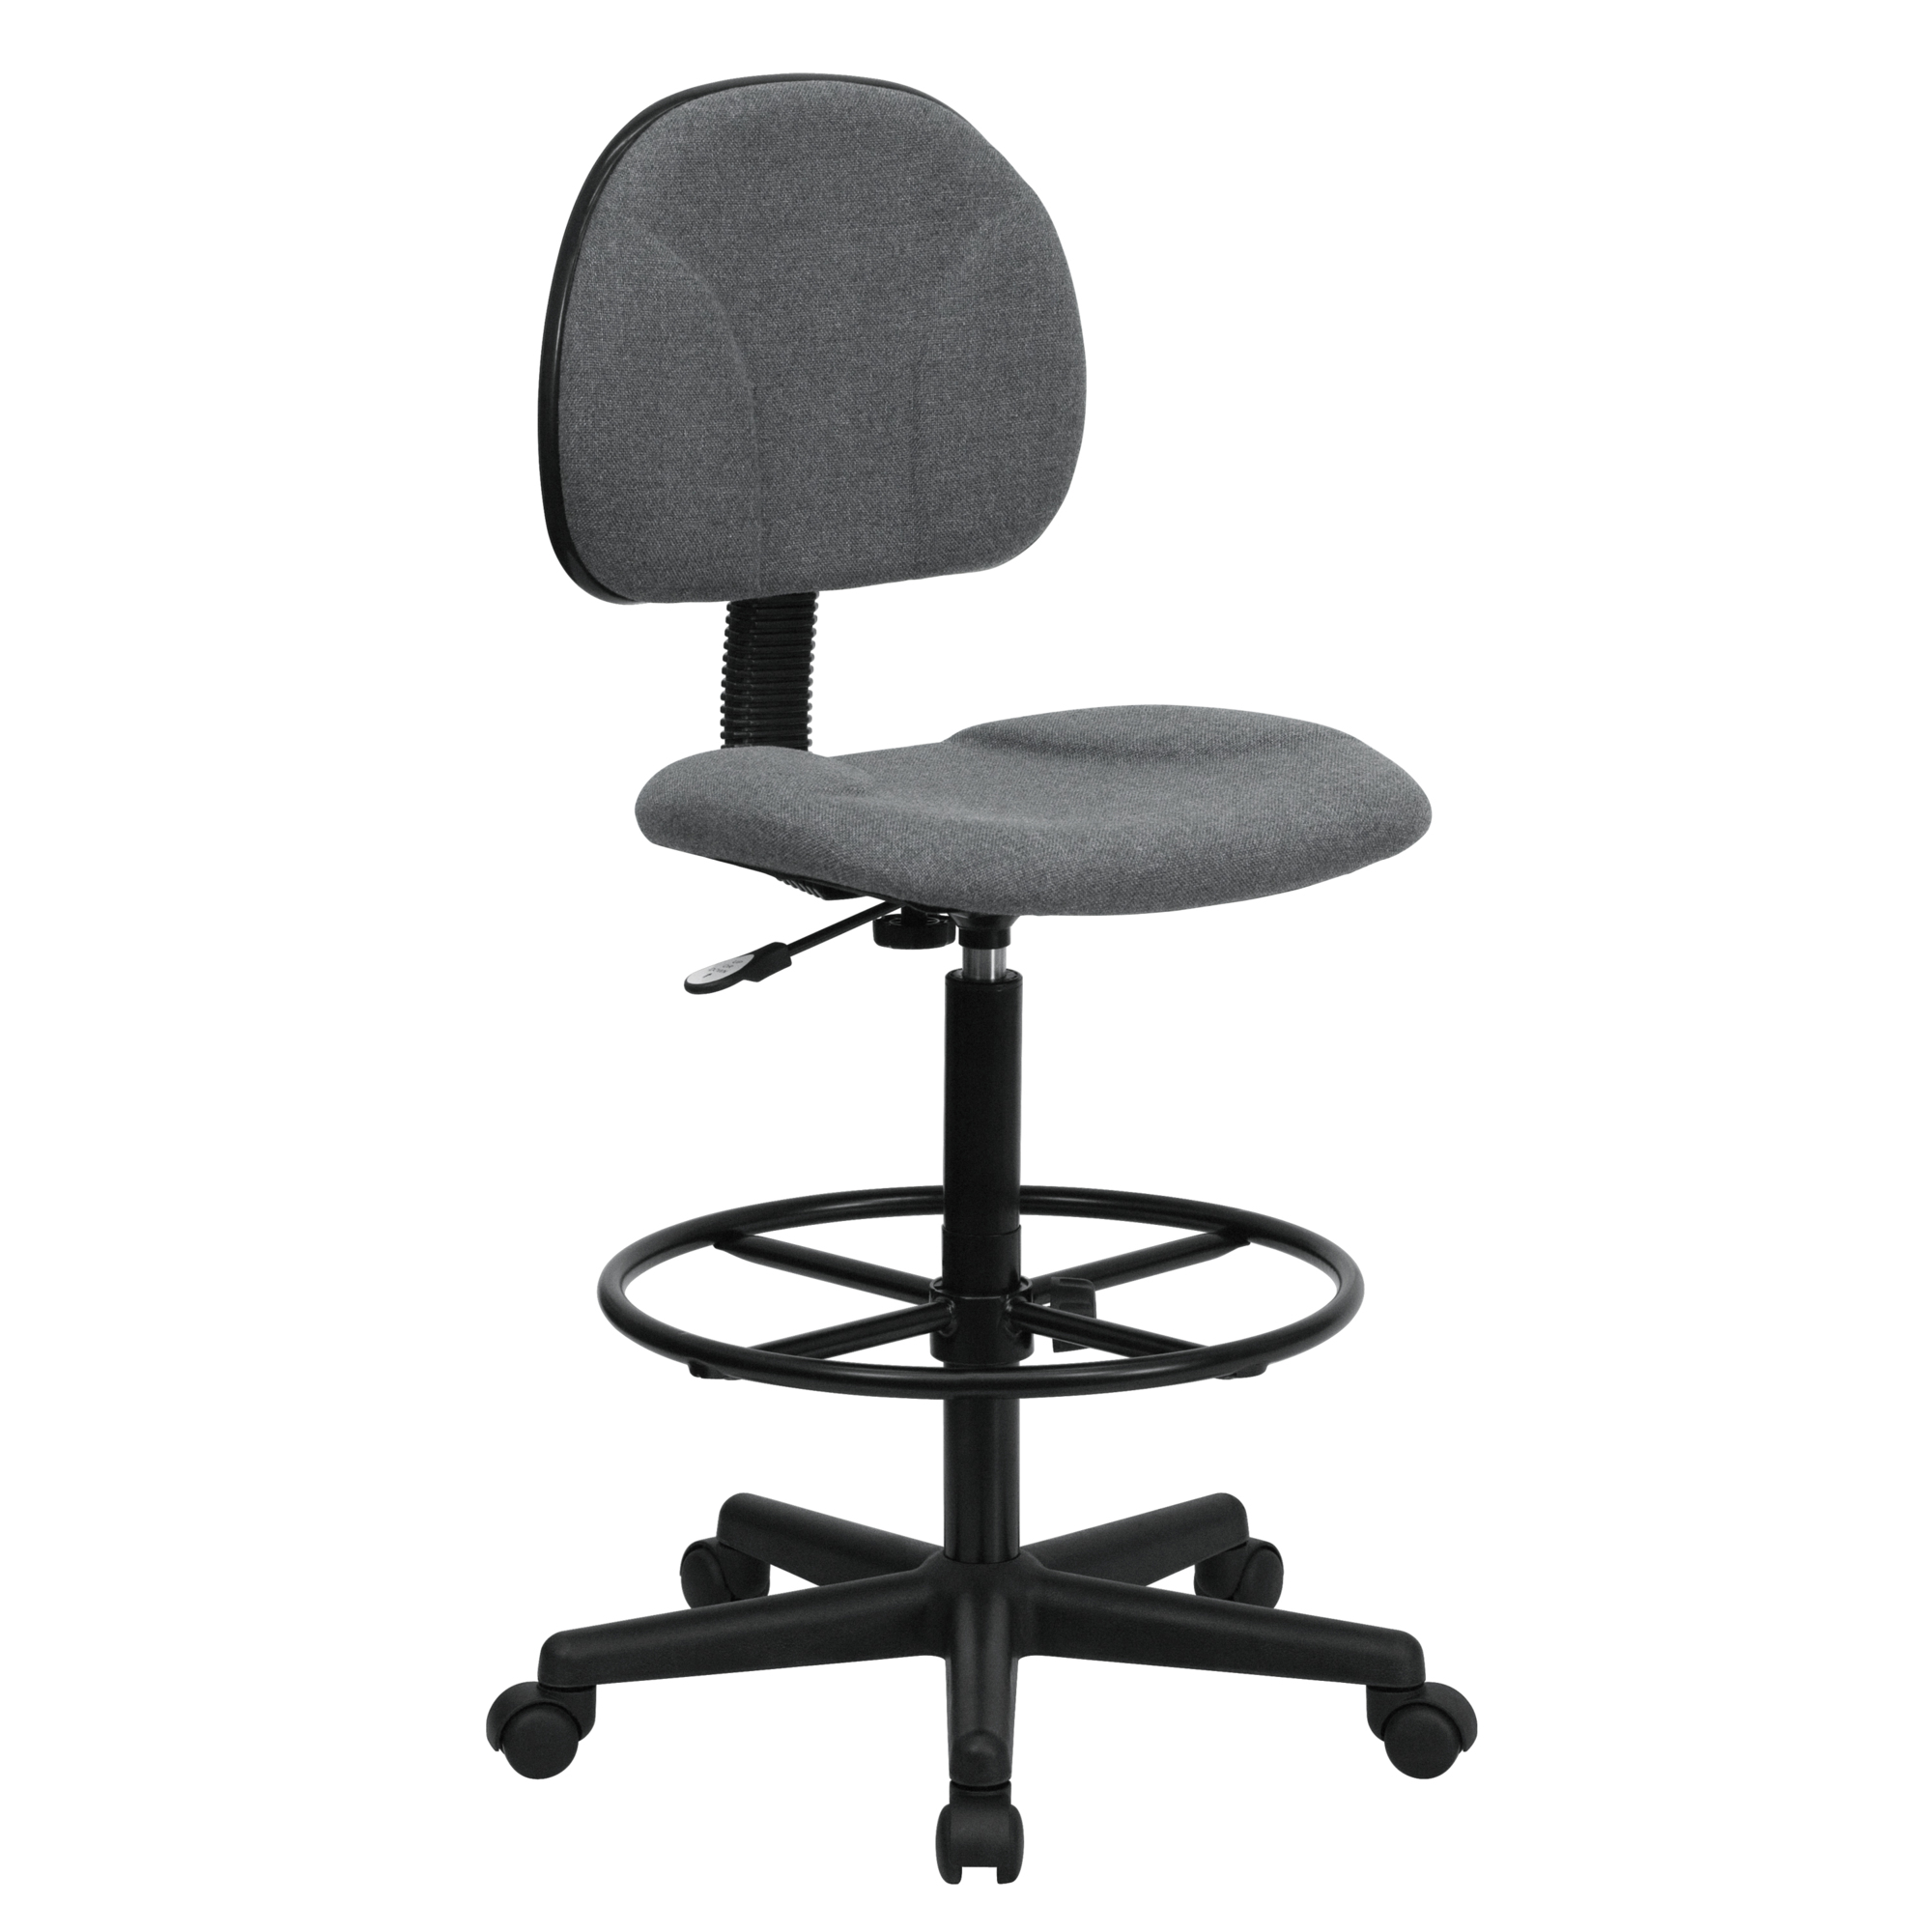 Flash Furniture, Gray Fabric Swivel Adjustable Drafting Chair, Primary Color Gray, Included (qty.) 1, Model BT659GRY